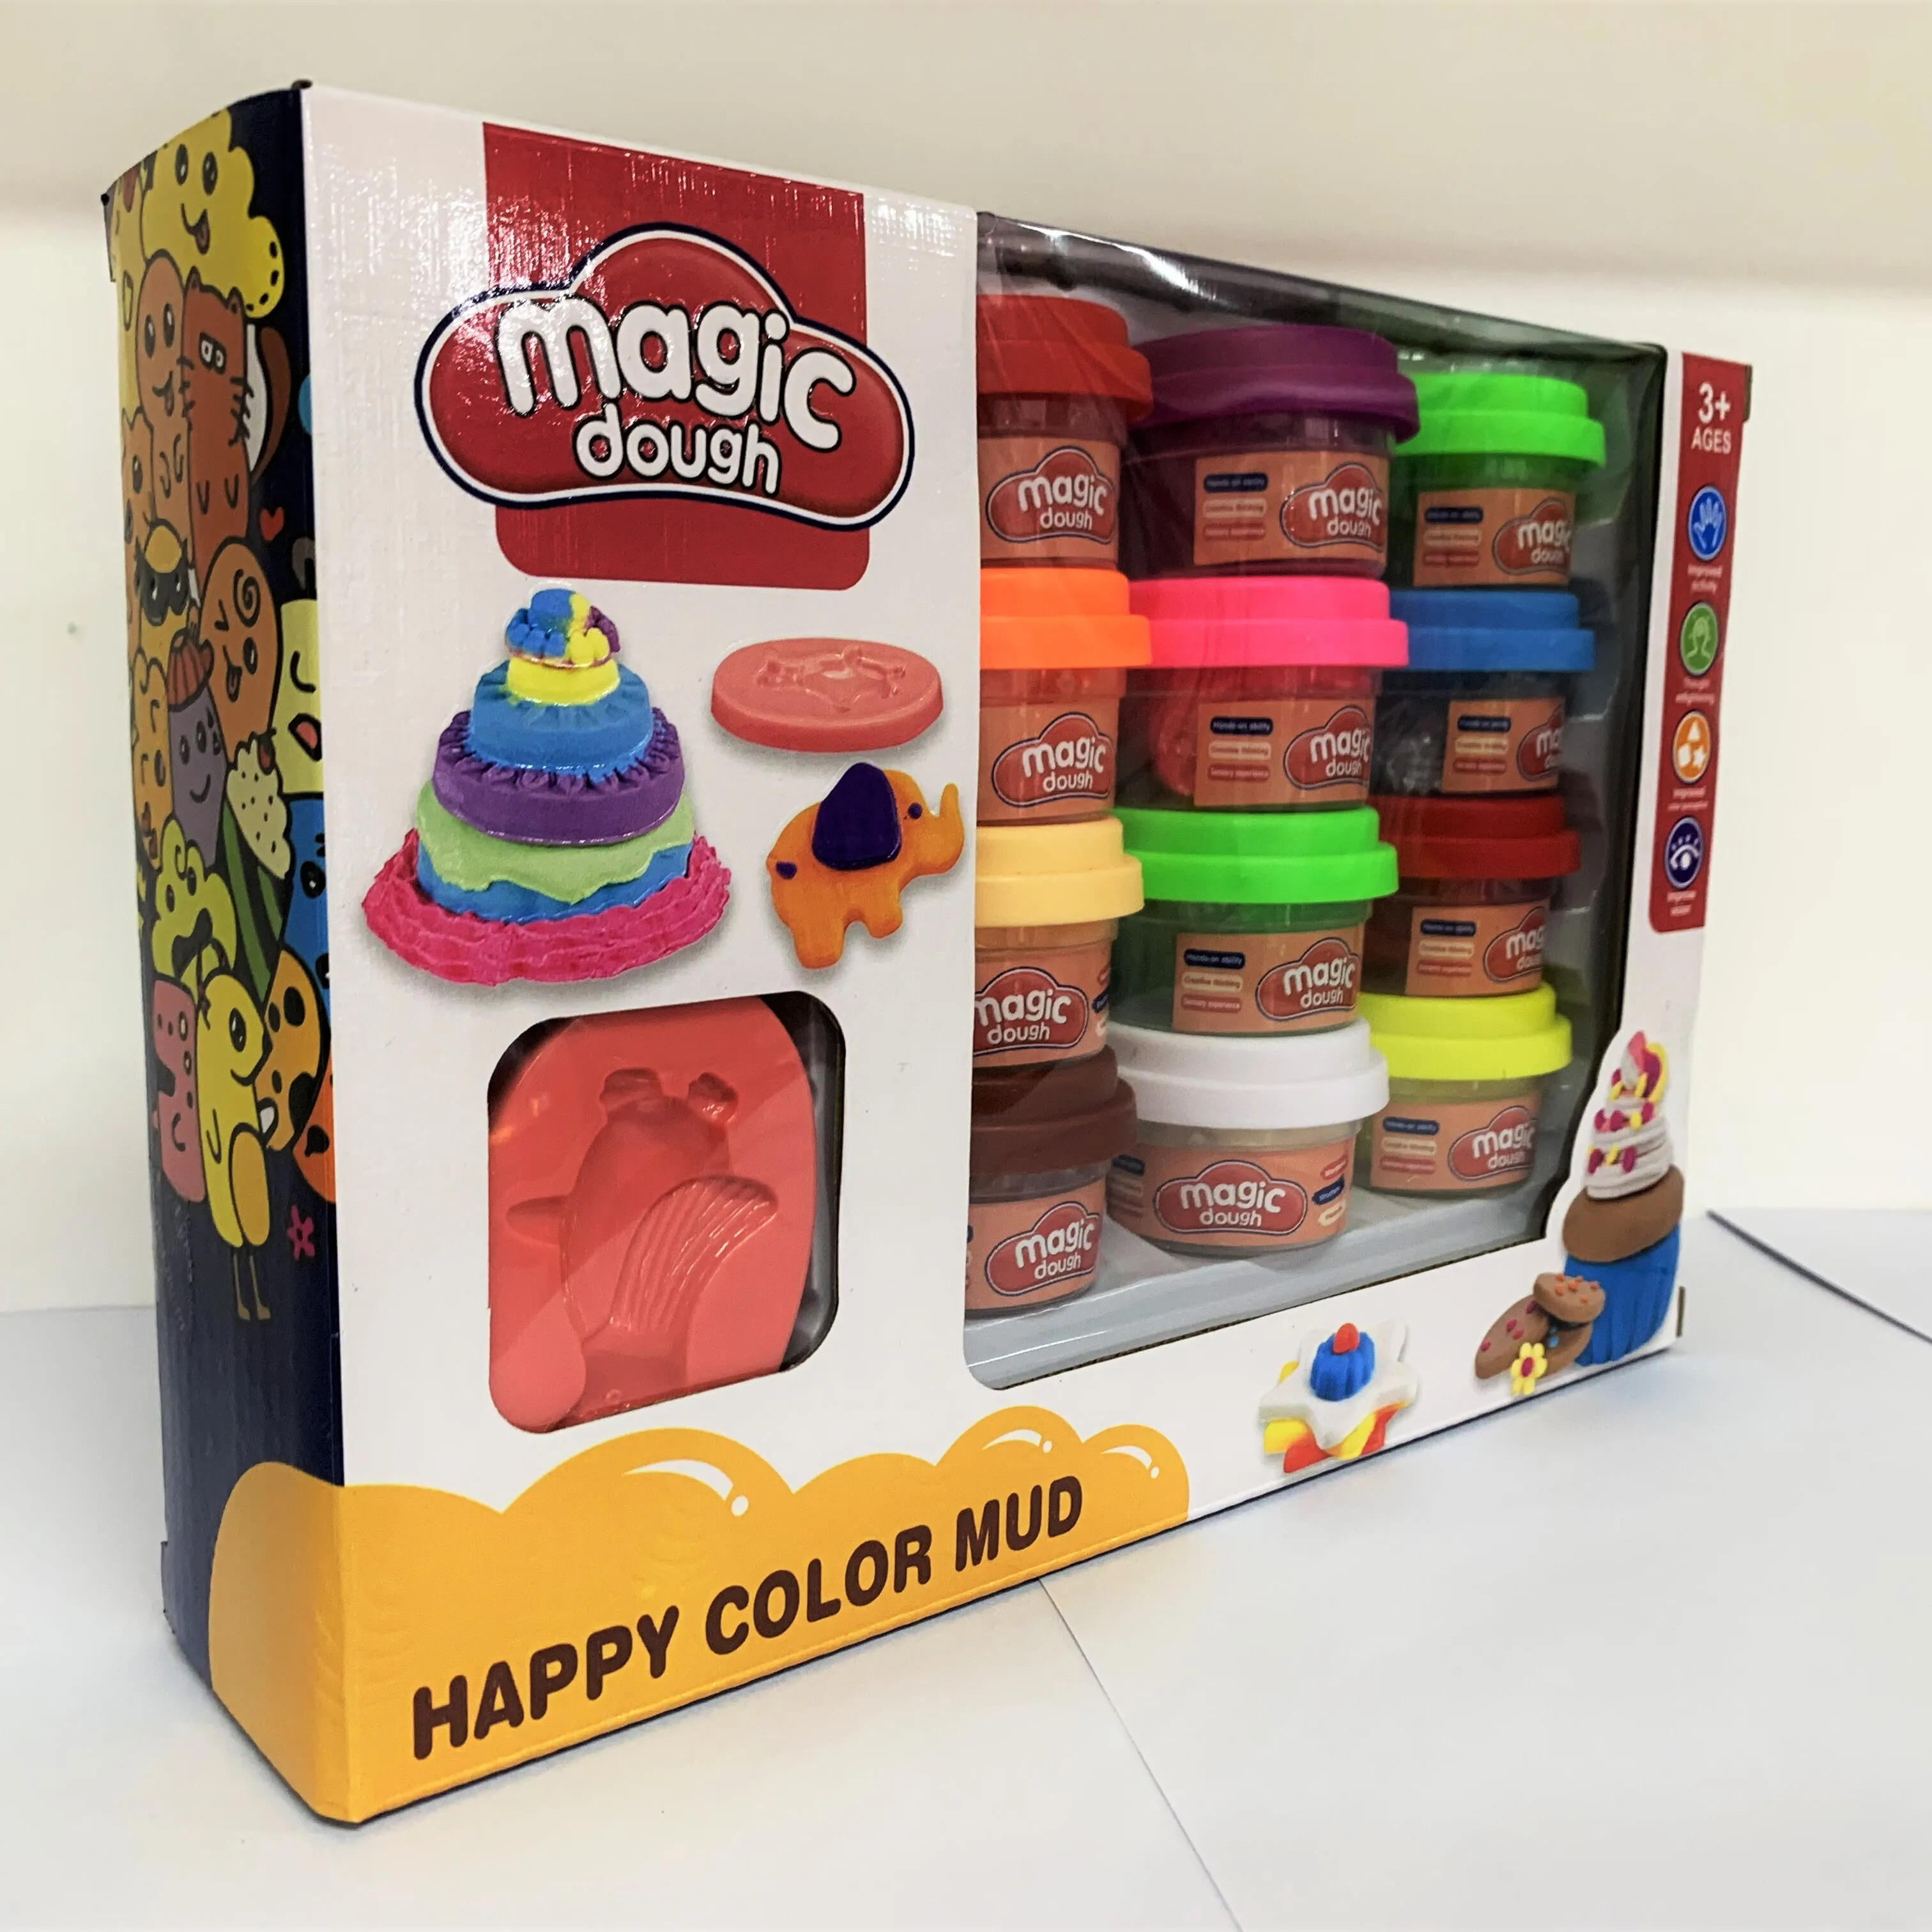 HW Modeling Compound Imagic Dough12-Pack Case of Colors, Non-Toxic, Assorted, 2 oz. Cans, Multicolor, Ages 3 and Up